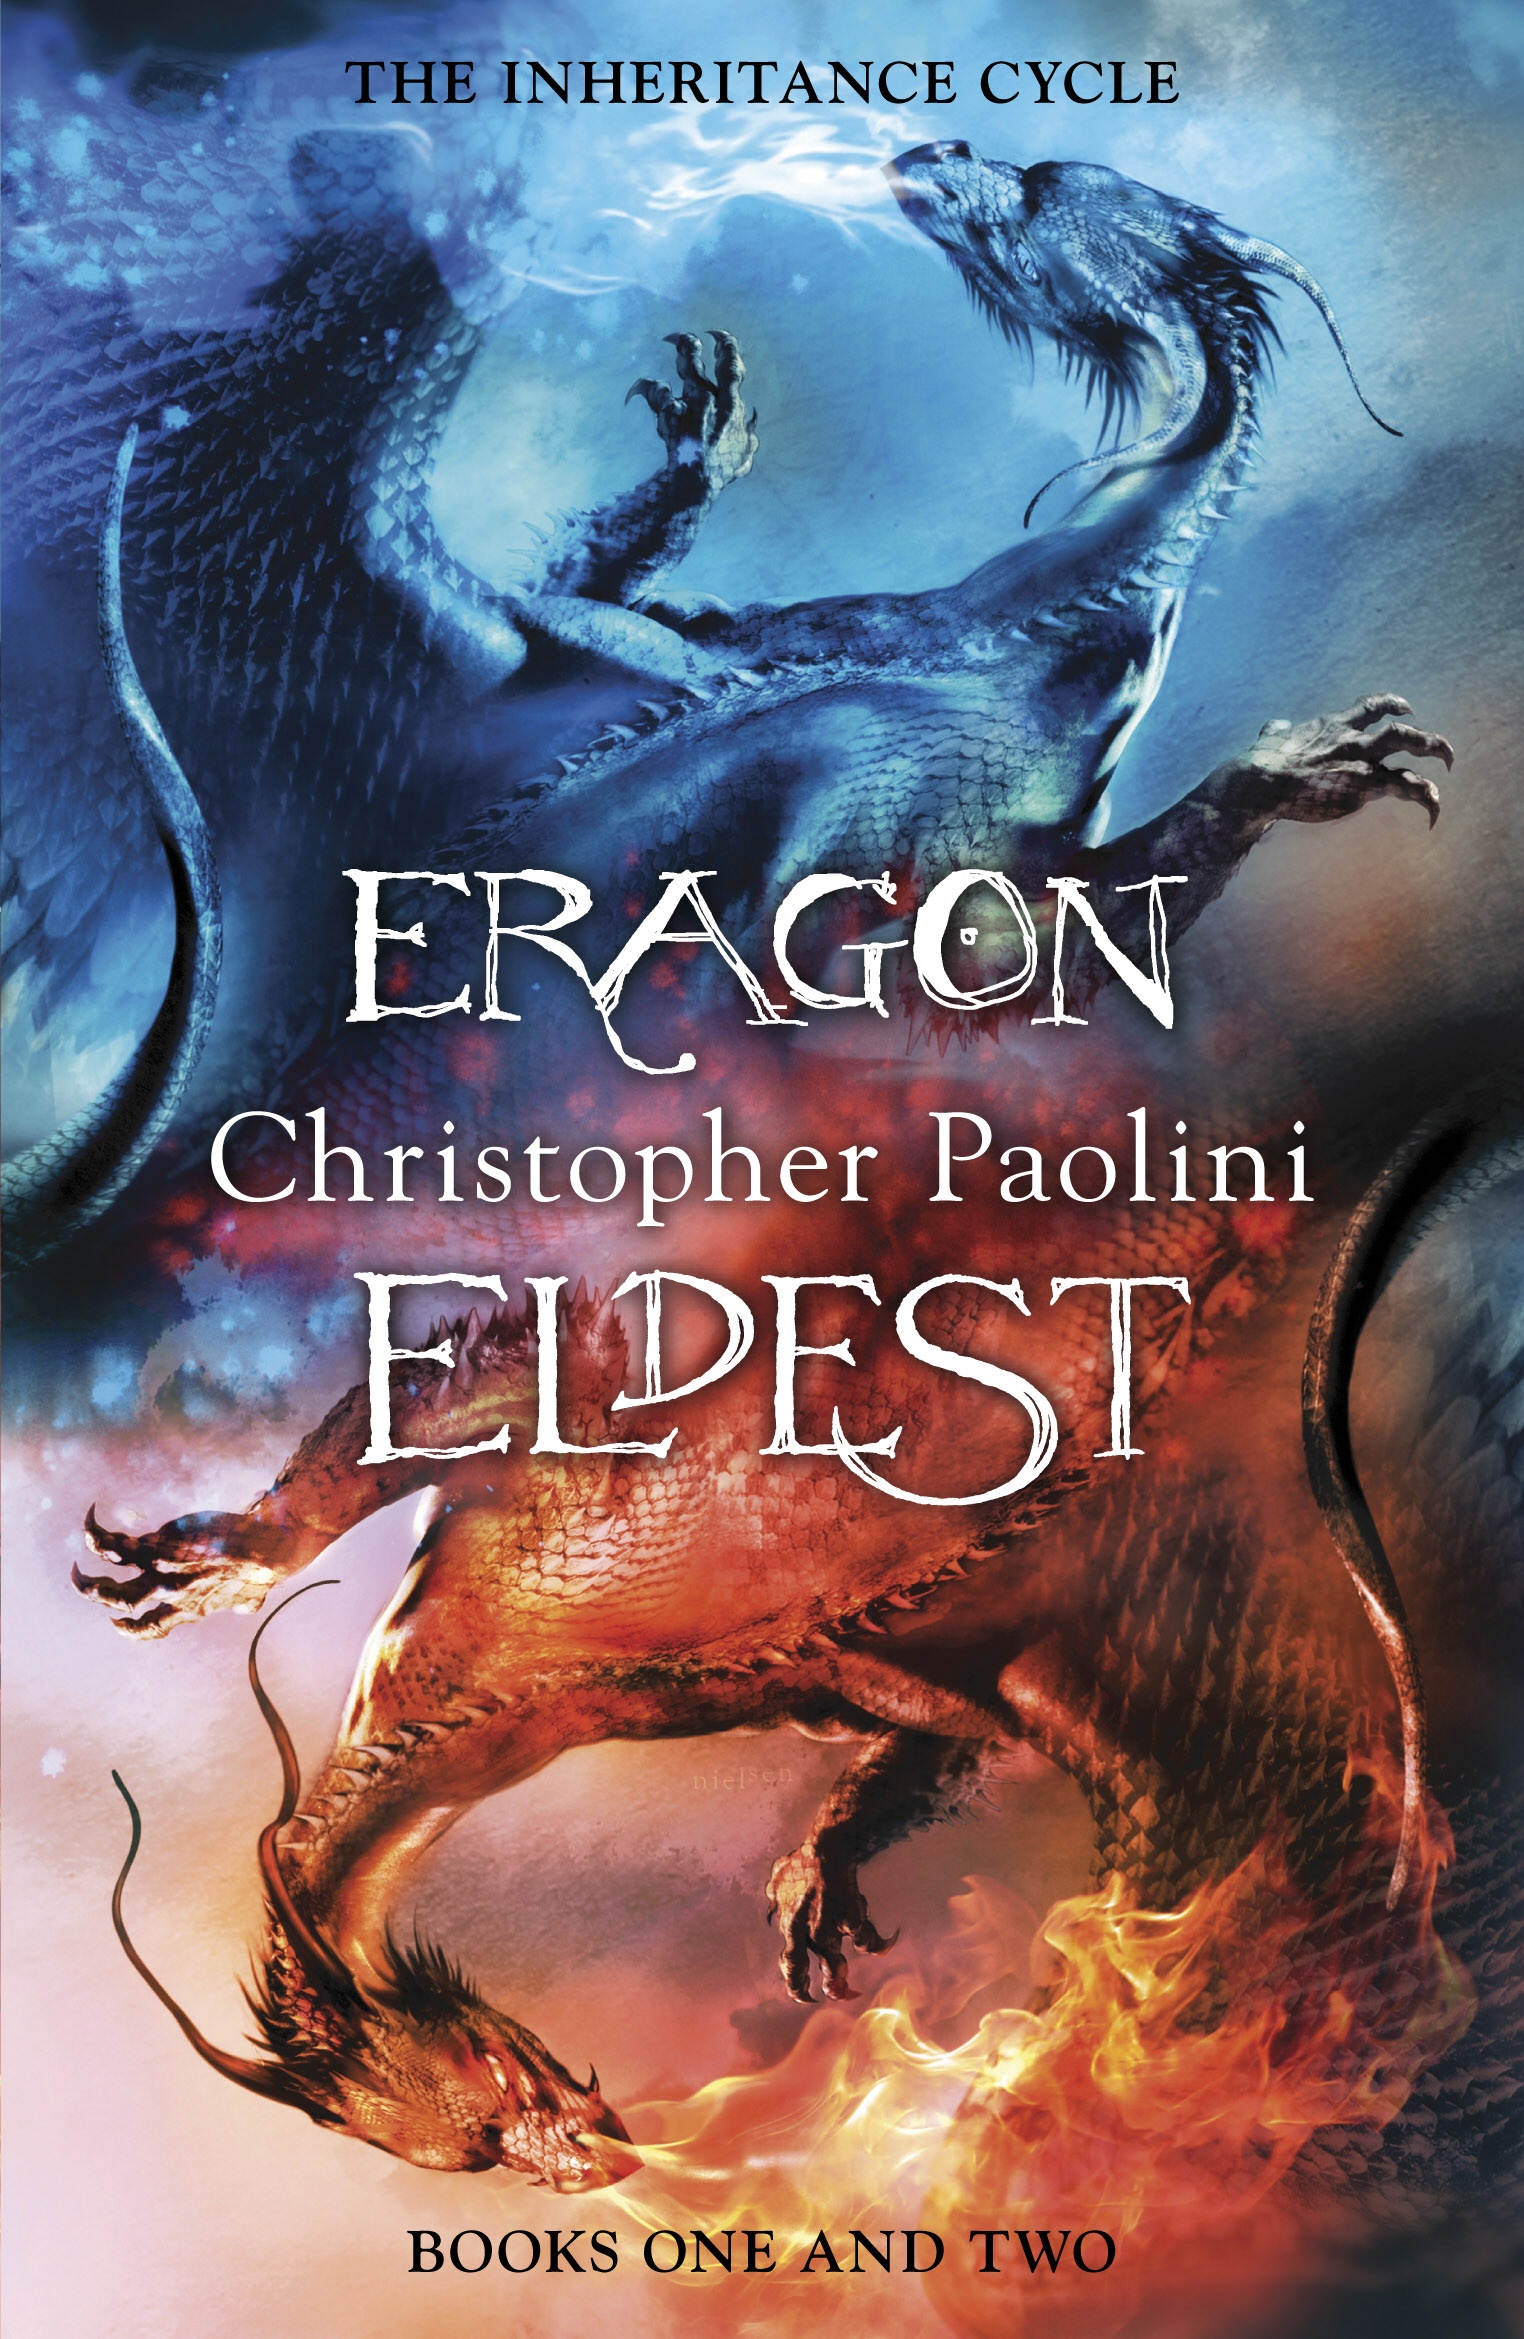 eragon-and-eldest-omnibus-by-christopher-paolini-penguin-books-new